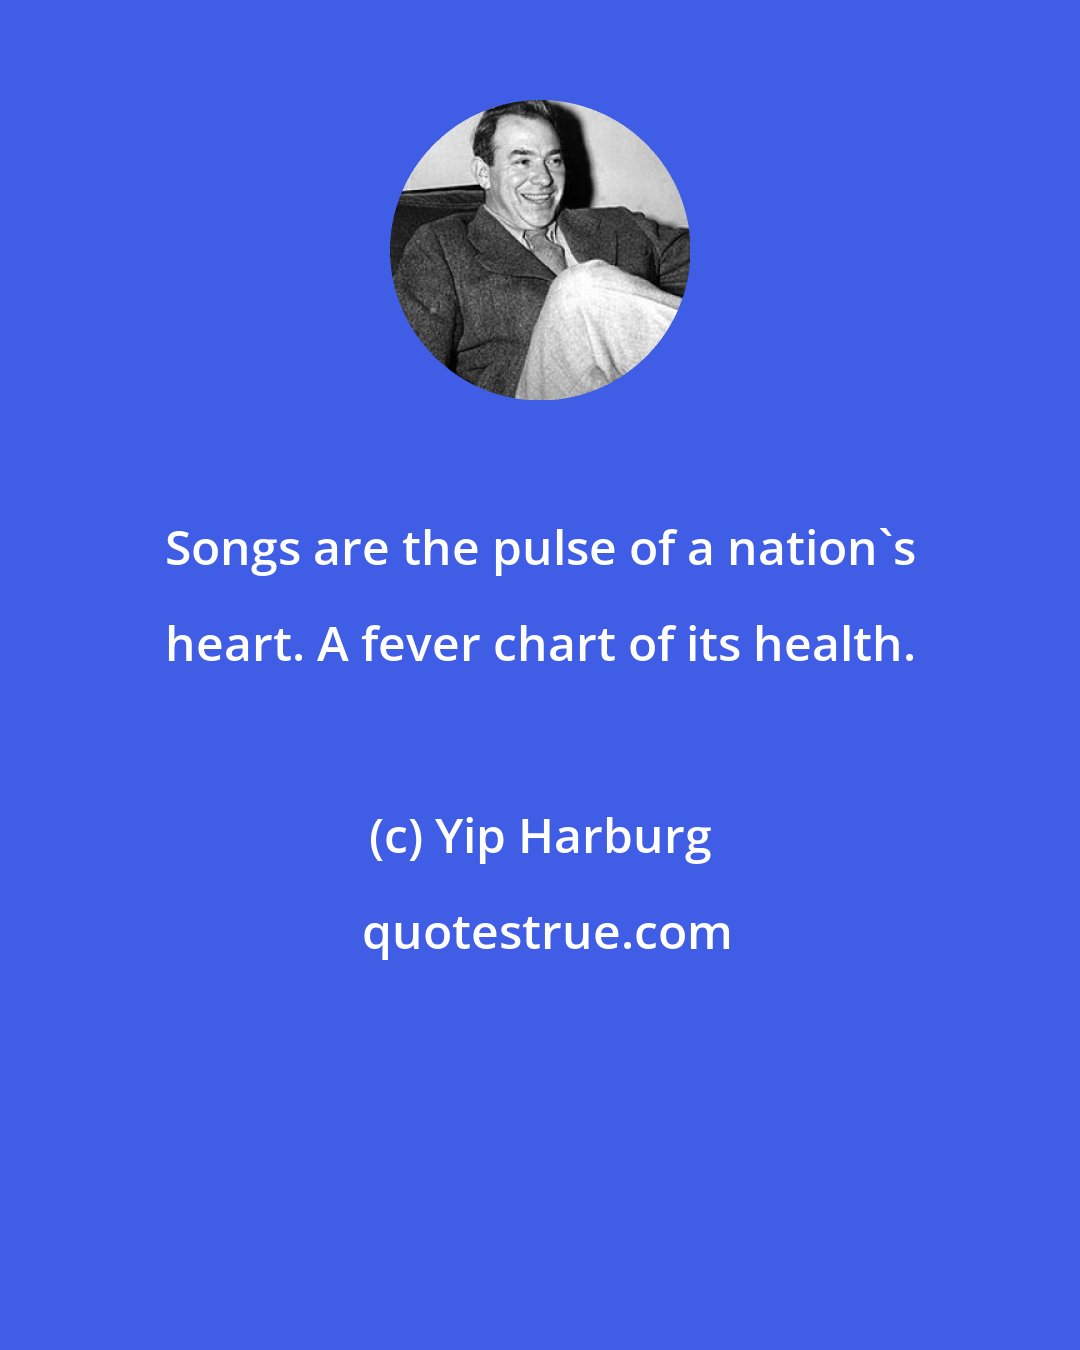 Yip Harburg: Songs are the pulse of a nation's heart. A fever chart of its health.